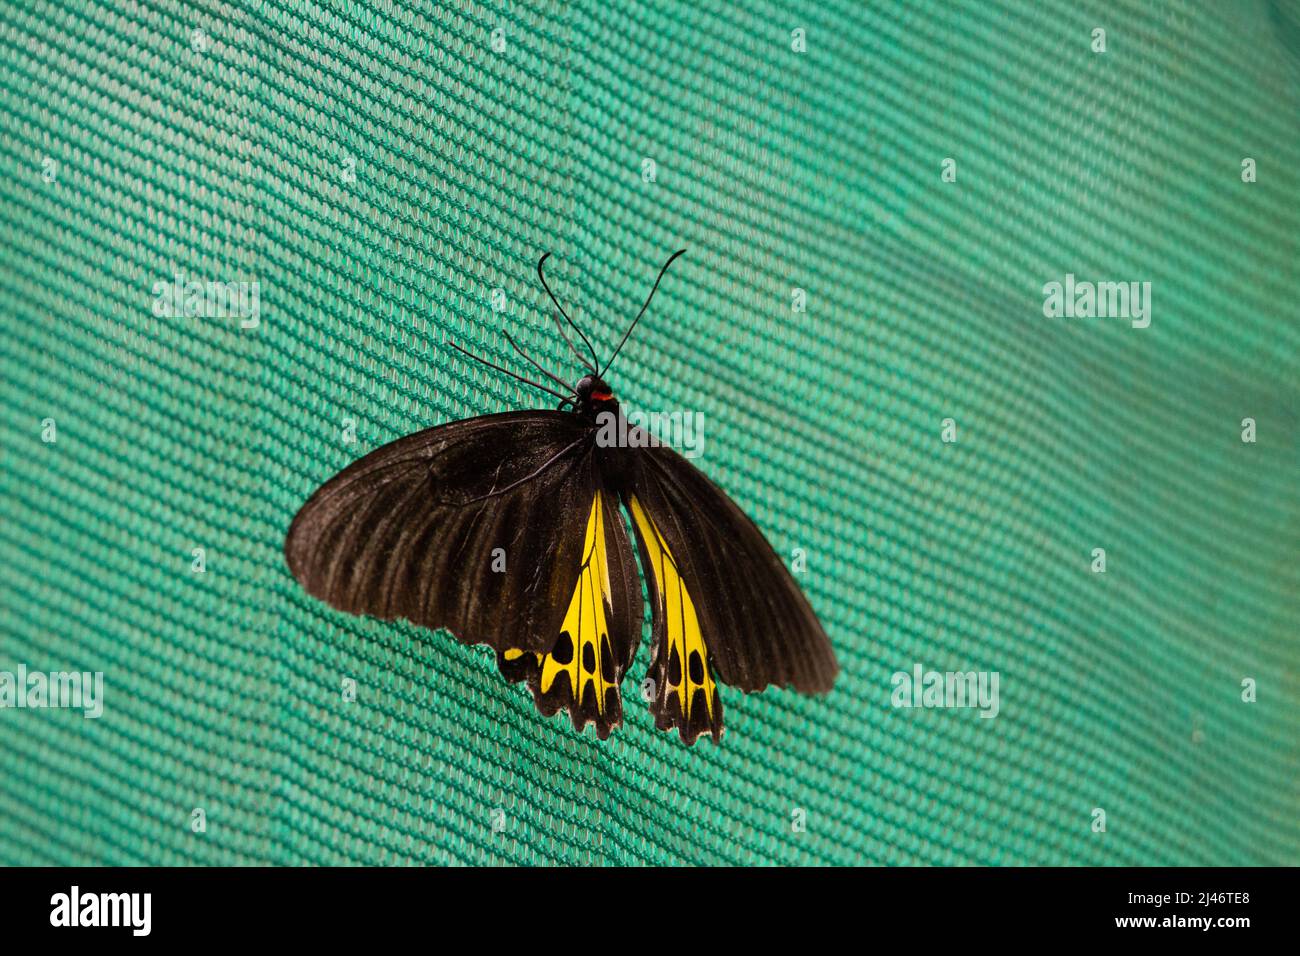 common birdwing (Troides helena) a common birdwing butterfly with yellow underwings resting on a natural green background Stock Photo